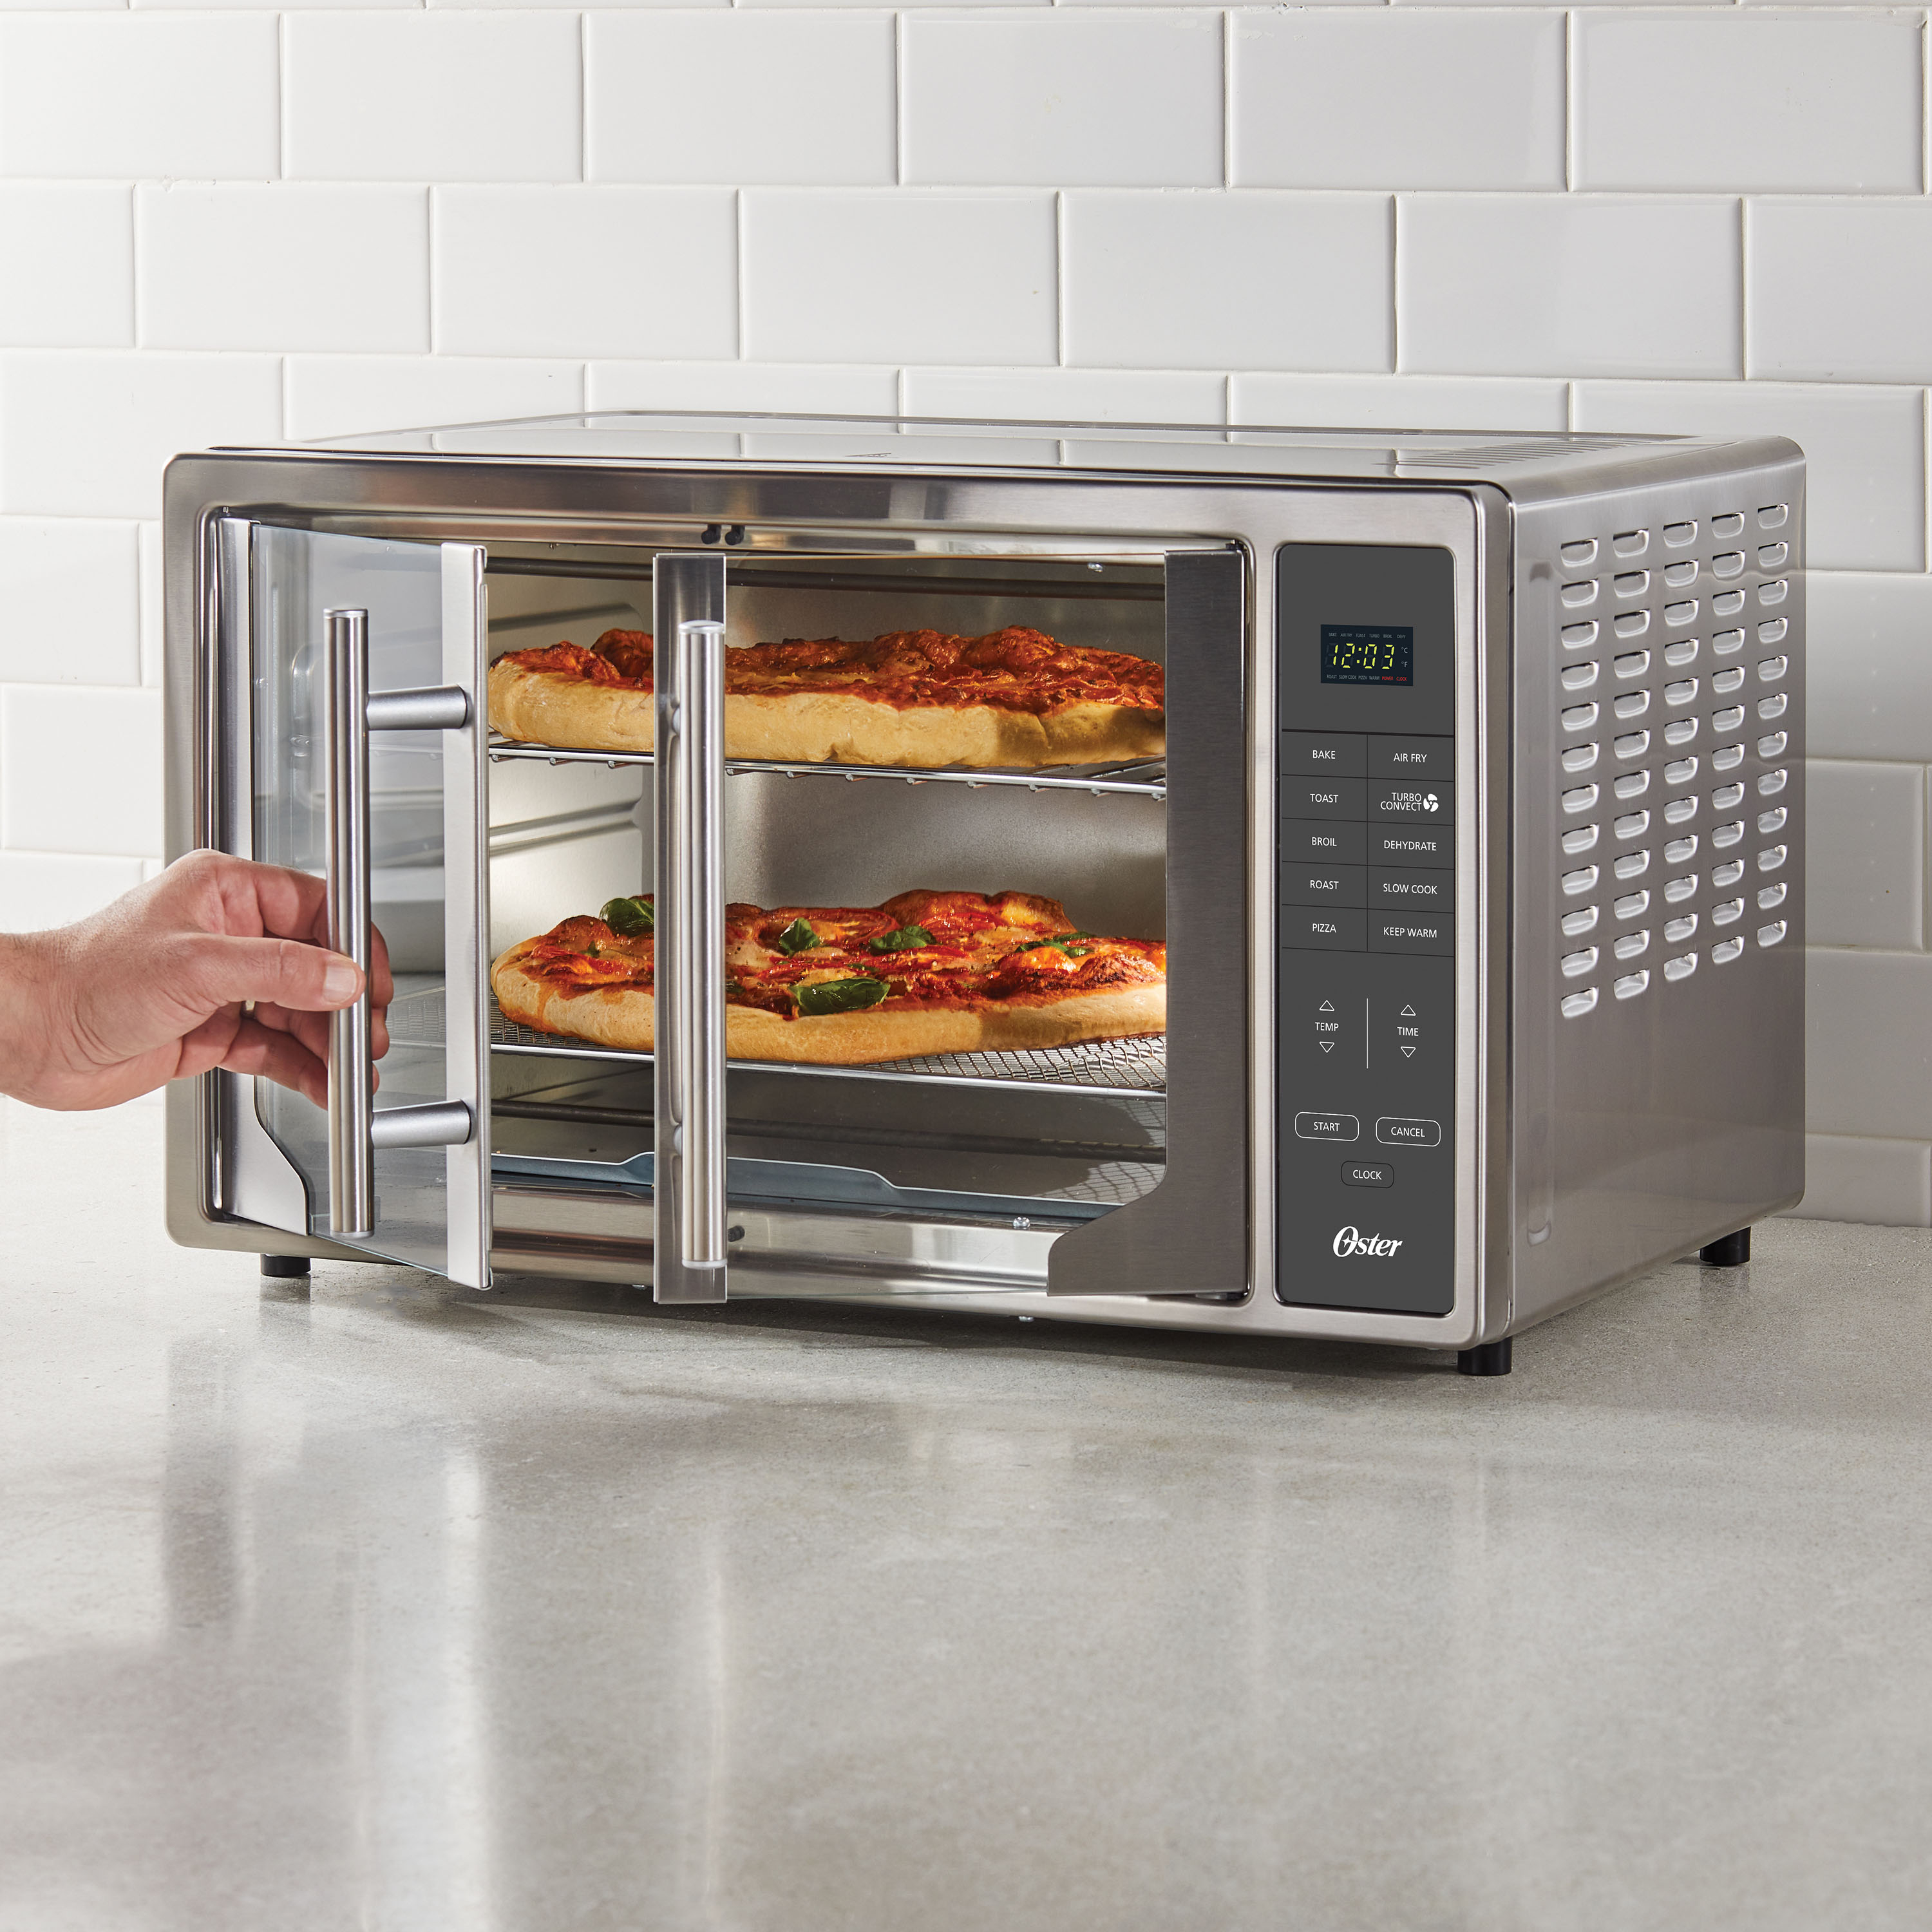 Oster French Door Turbo Convection Toaster Oven with Extra Large Interior, Black